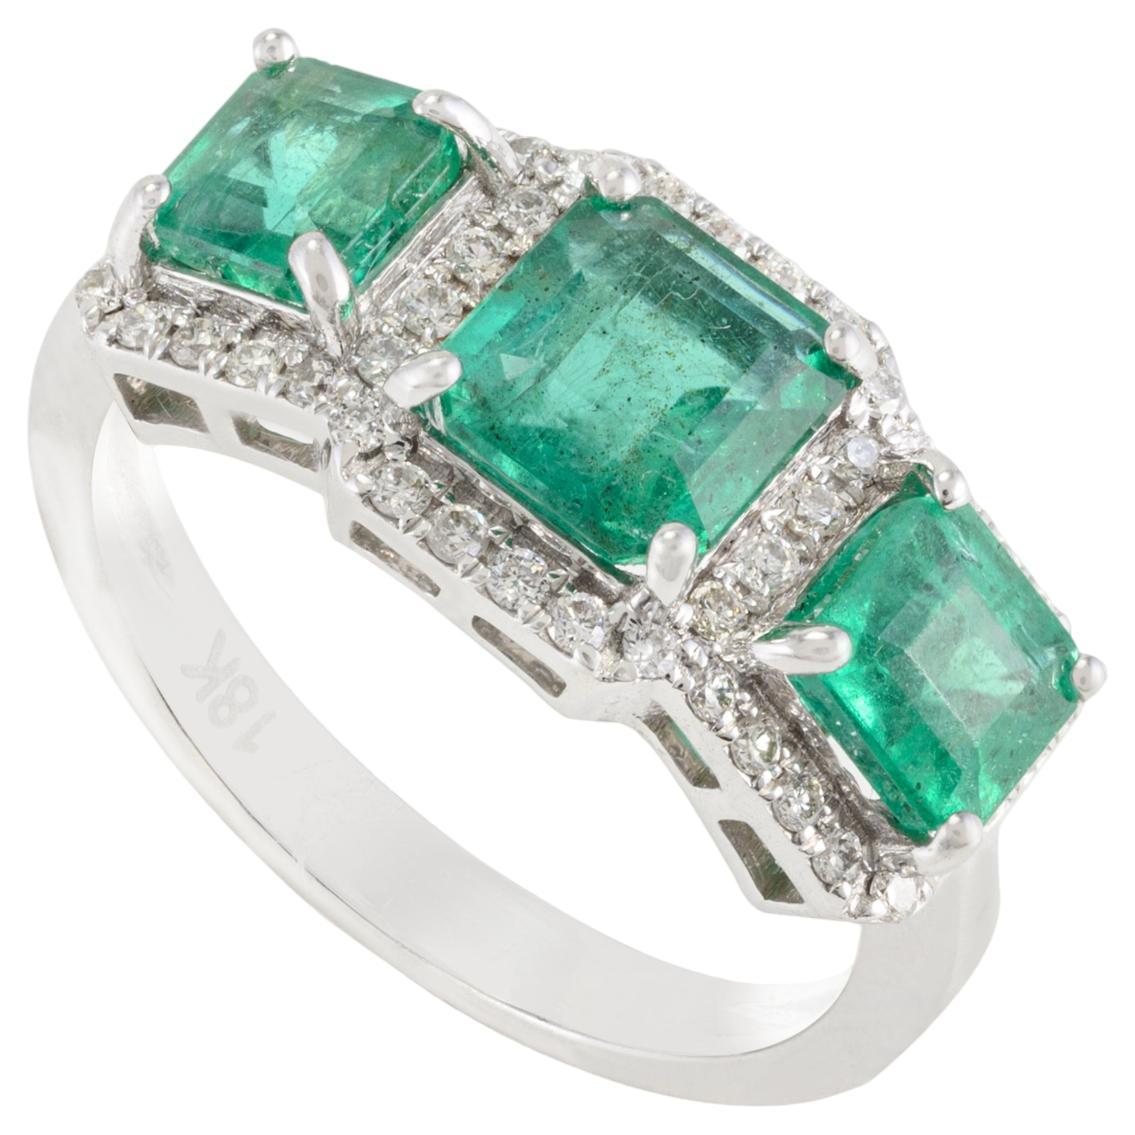 For Sale:  Three Stone Emerald Wedding Ring with Halo Diamond in 18k Solid White Gold